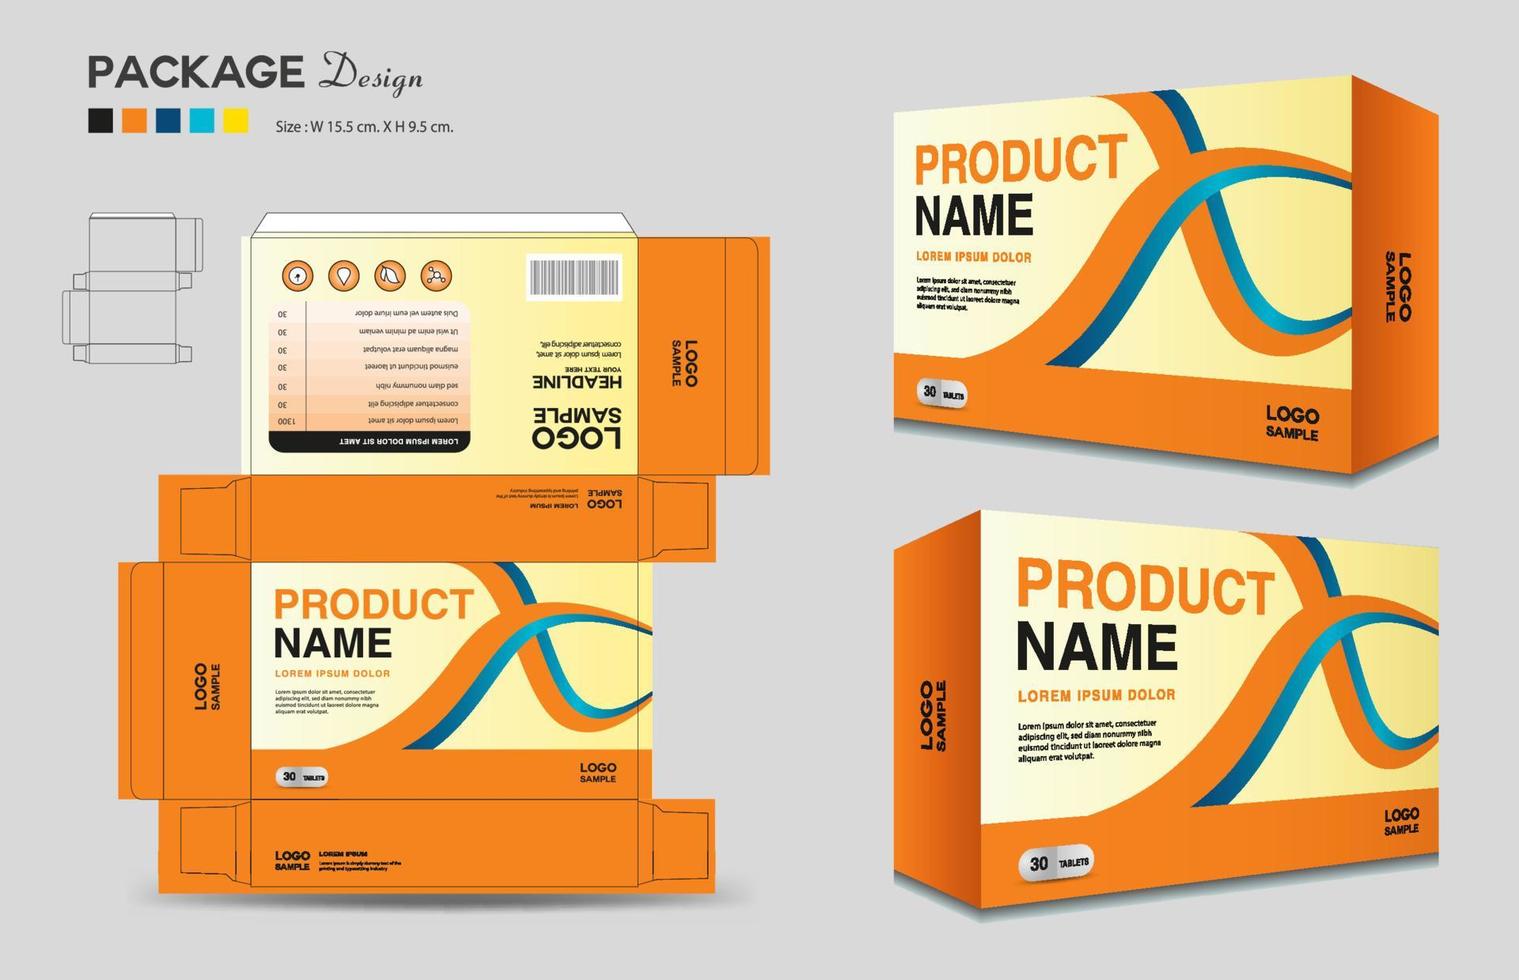 Cosmetic box design, Medical Package design template, Supplements Box Packaging design, Label design, healthcare label, packaging creative idea vector, box outline, 3d box realistic mock-up, vector